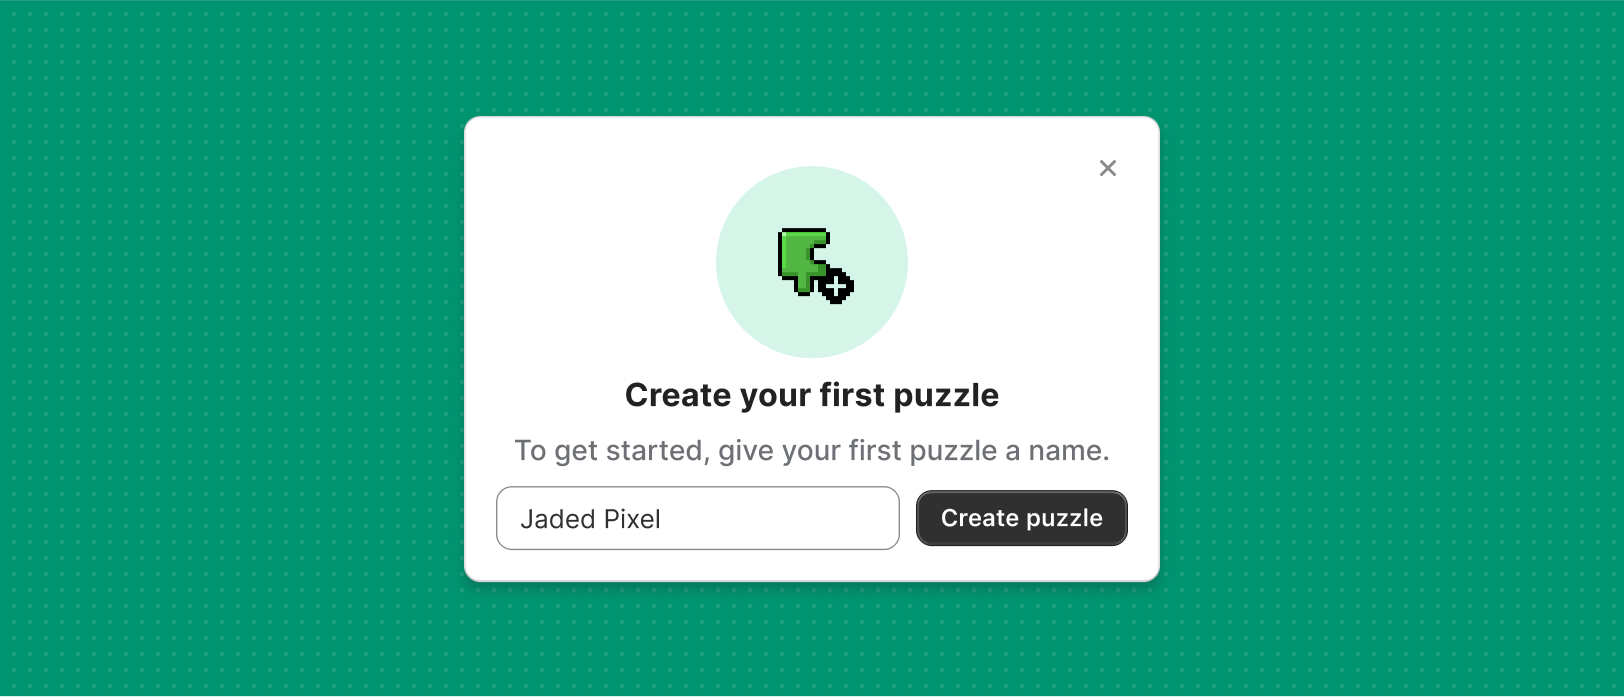 A dismissible onboarding step that asks merchants to name their first puzzle, with a primary button that's labeled "Create puzzle".